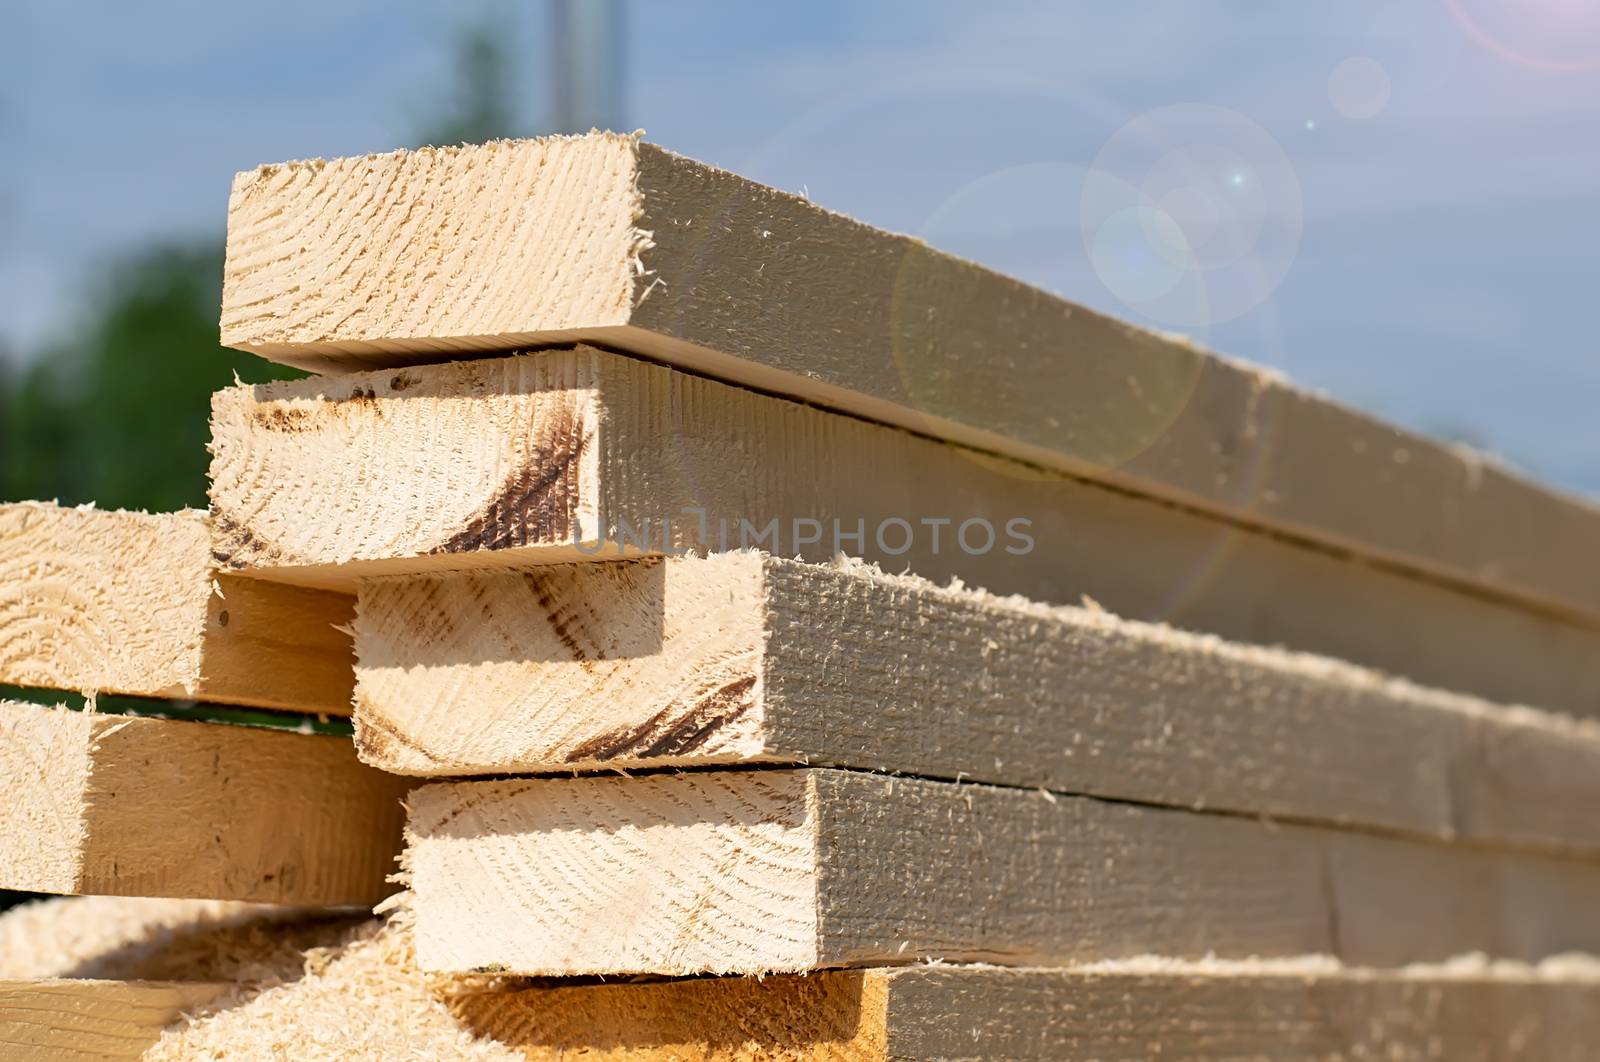 a pile of roughly sawn, cut long wooden bars, boards, lie in the open air on the street background the sky